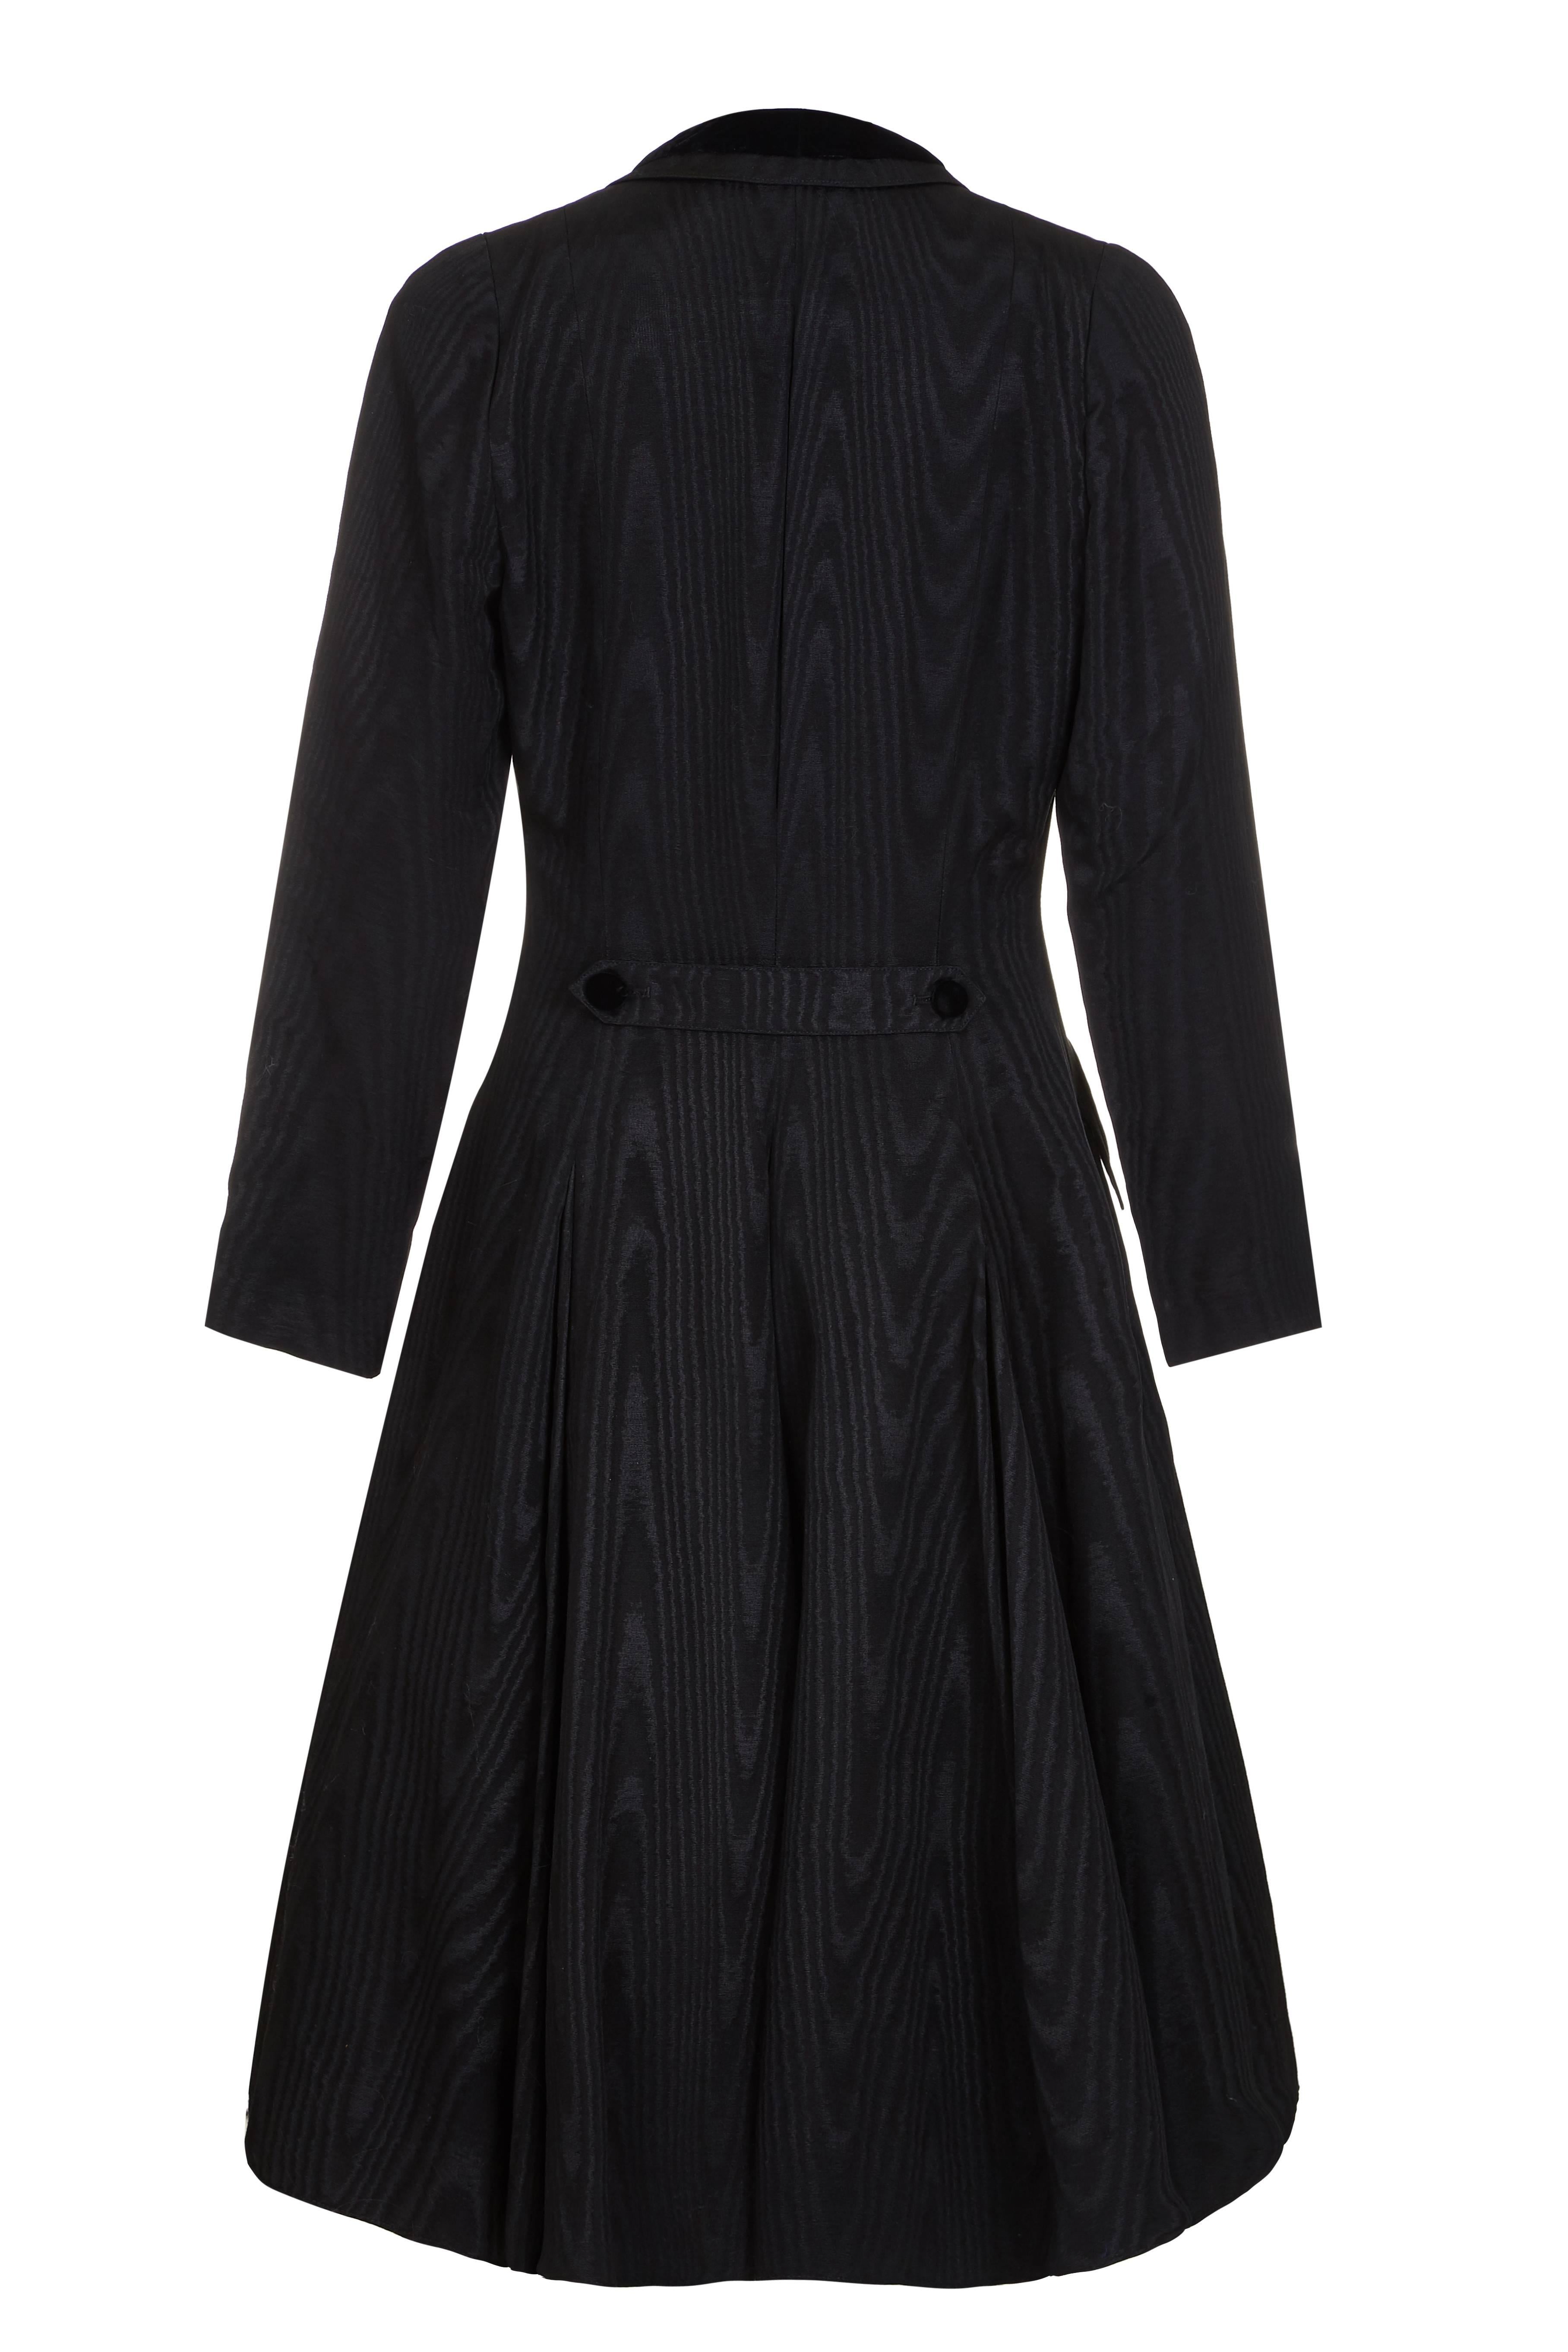 Very theatrical 1980s Louis Feraud black moire (watered) fabric dress in the style of a Victorian riding coat.  Beautifully made and very fitted, the double breasted design features velvet buttons and trim on the neckline of the collar and pockets. 